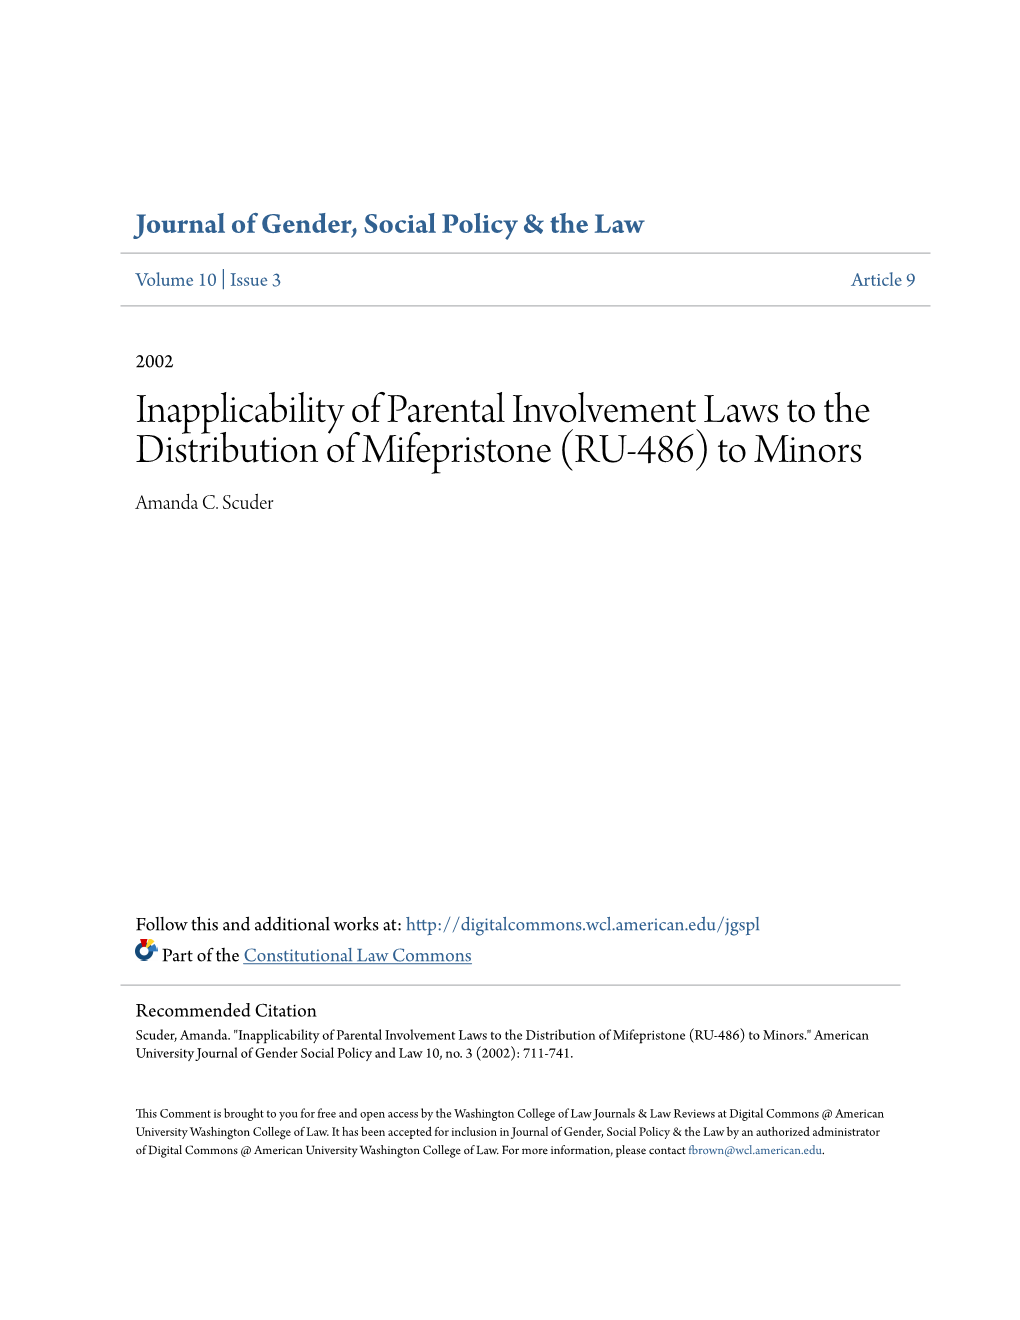 Inapplicability of Parental Involvement Laws to the Distribution of Mifepristone (RU-486) to Minors Amanda C